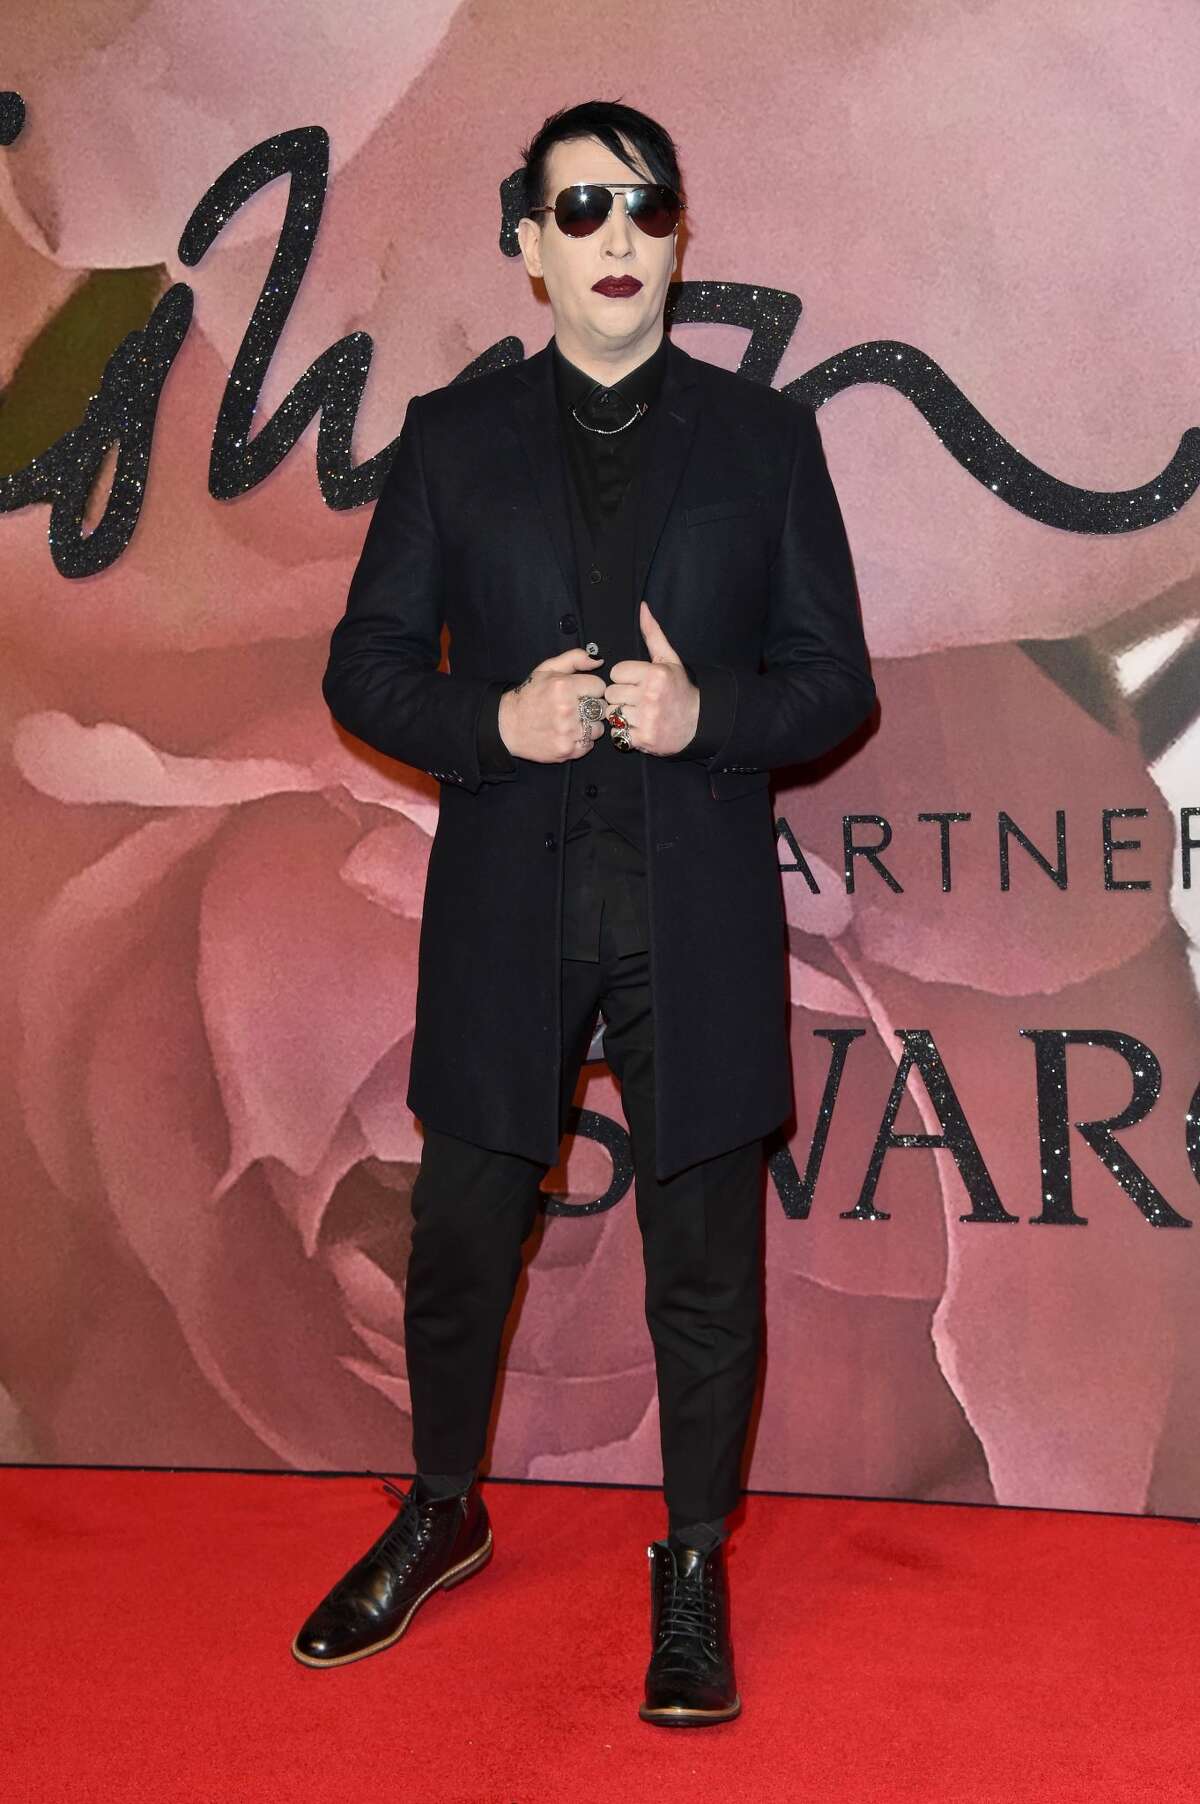 LONDON, ENGLAND - DECEMBER 05: Marilyn Manson attends The Fashion Awards 2016 on December 5, 2016 in London, United Kingdom. (Photo by Stuart C. Wilson/Getty Images)